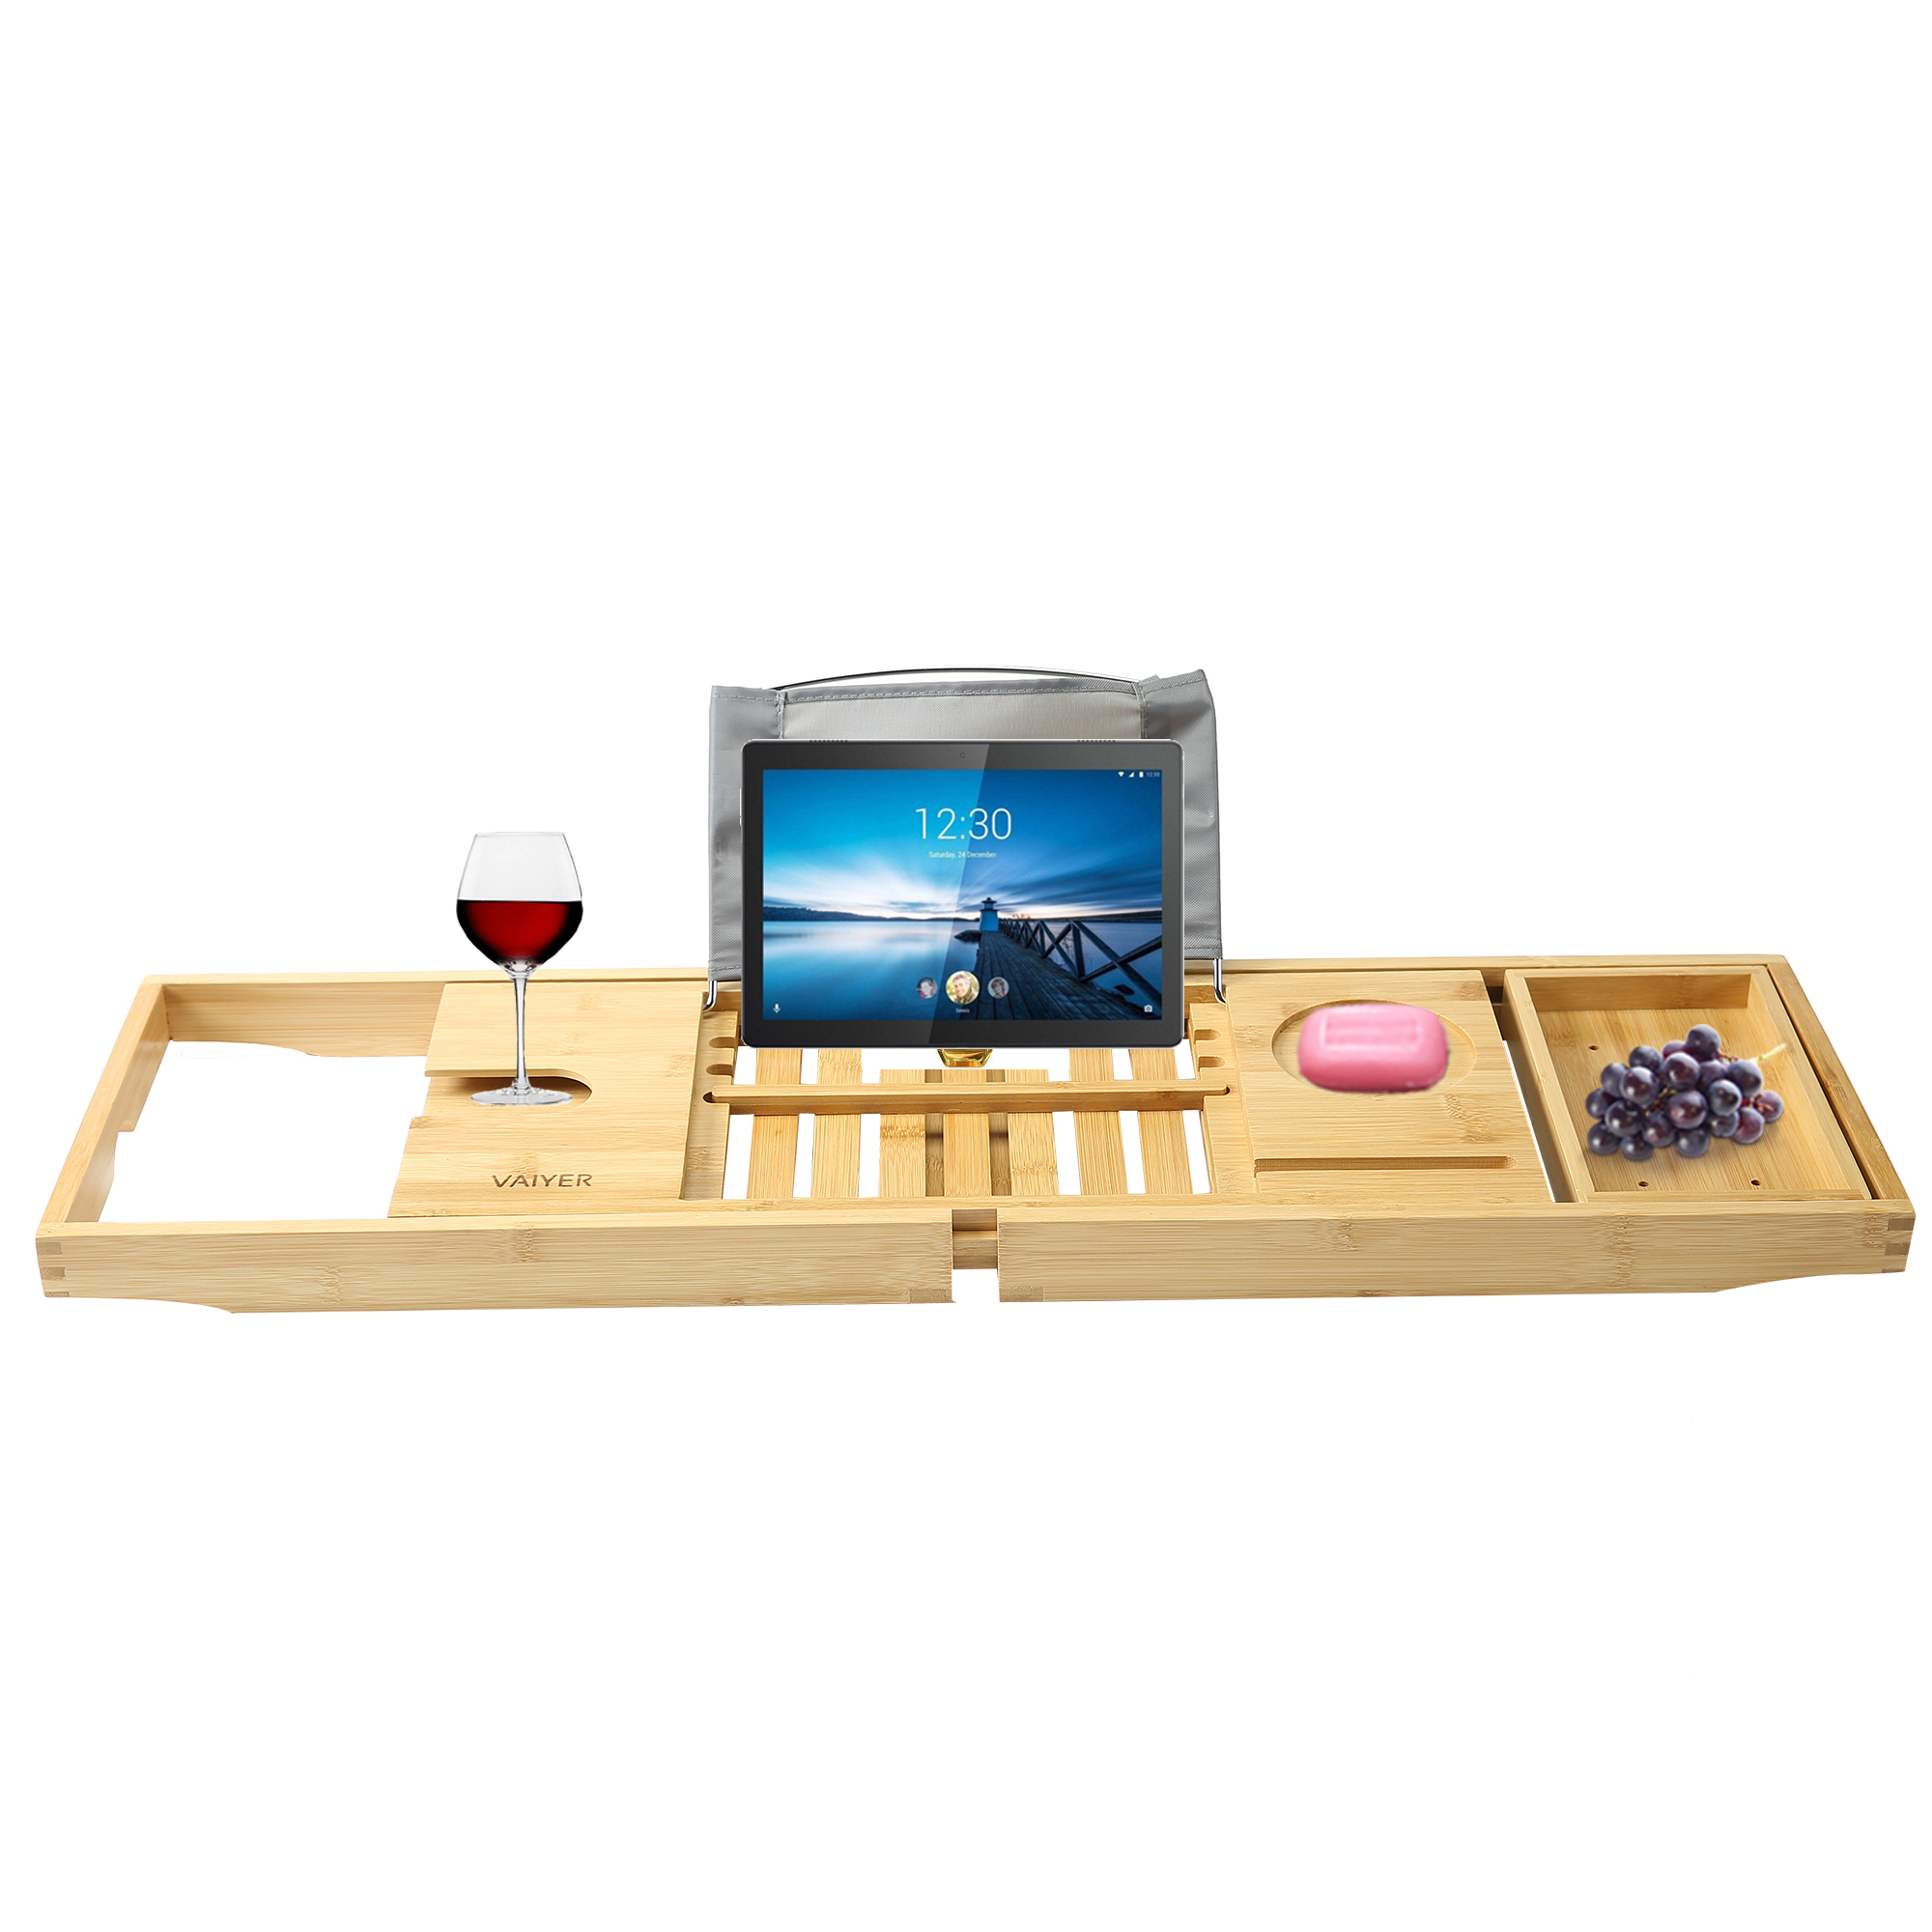 Vaiyer Bamboo Bathtub Tray, Caddy Wooden Bath Tray, Table w/ Extending Sides, Reading Rack, Tablet Holder, Mobile Tray & Wine Glass Holder